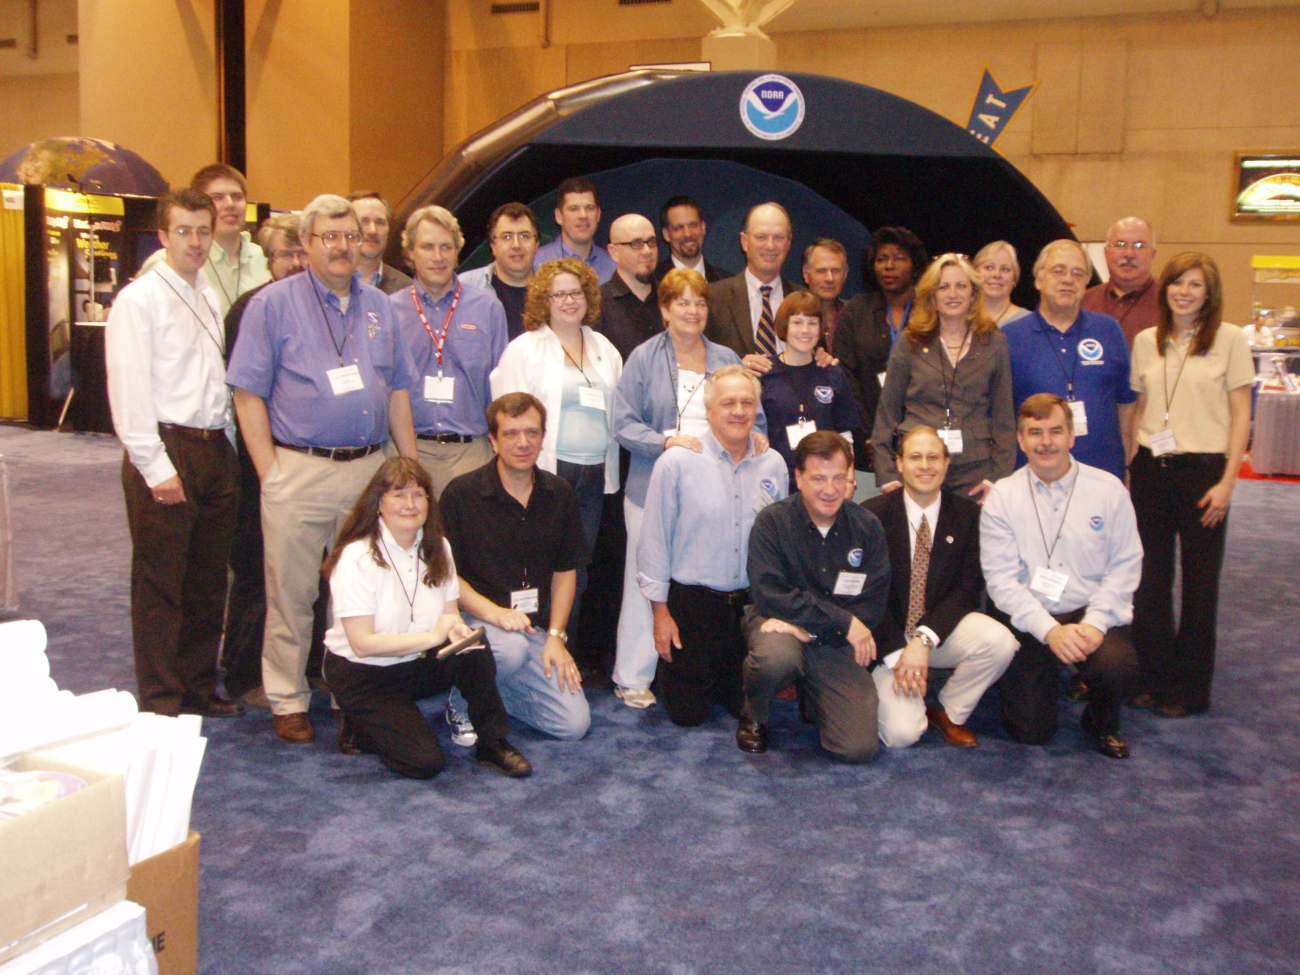 NOAA personnel including representatives of the NOAA Office of Education,National Weather Service, National Ocean Service, Office of Oceanic andAtmospheric Research, and National Environmental Satellite, Data InformationService surrounded ocean explorer Dr